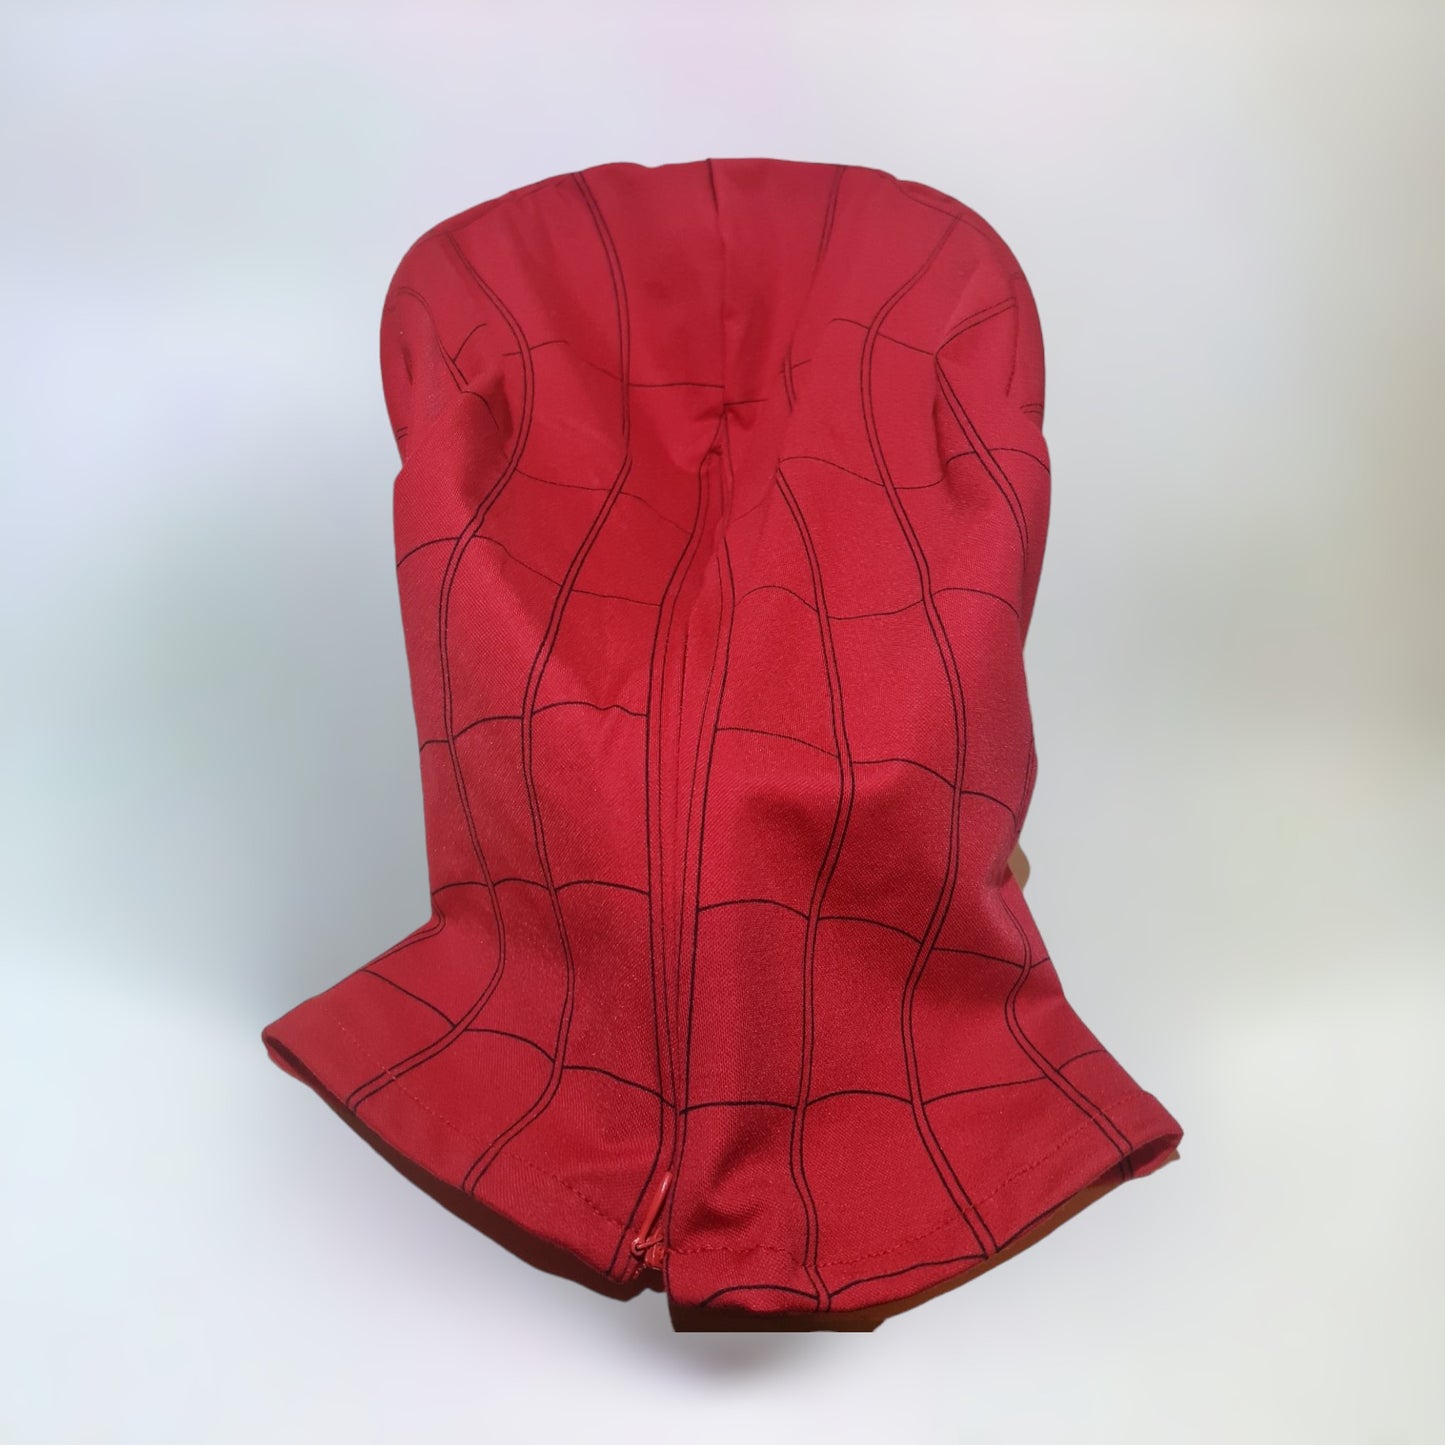 Spiderman mask with blinking movable eyes back side